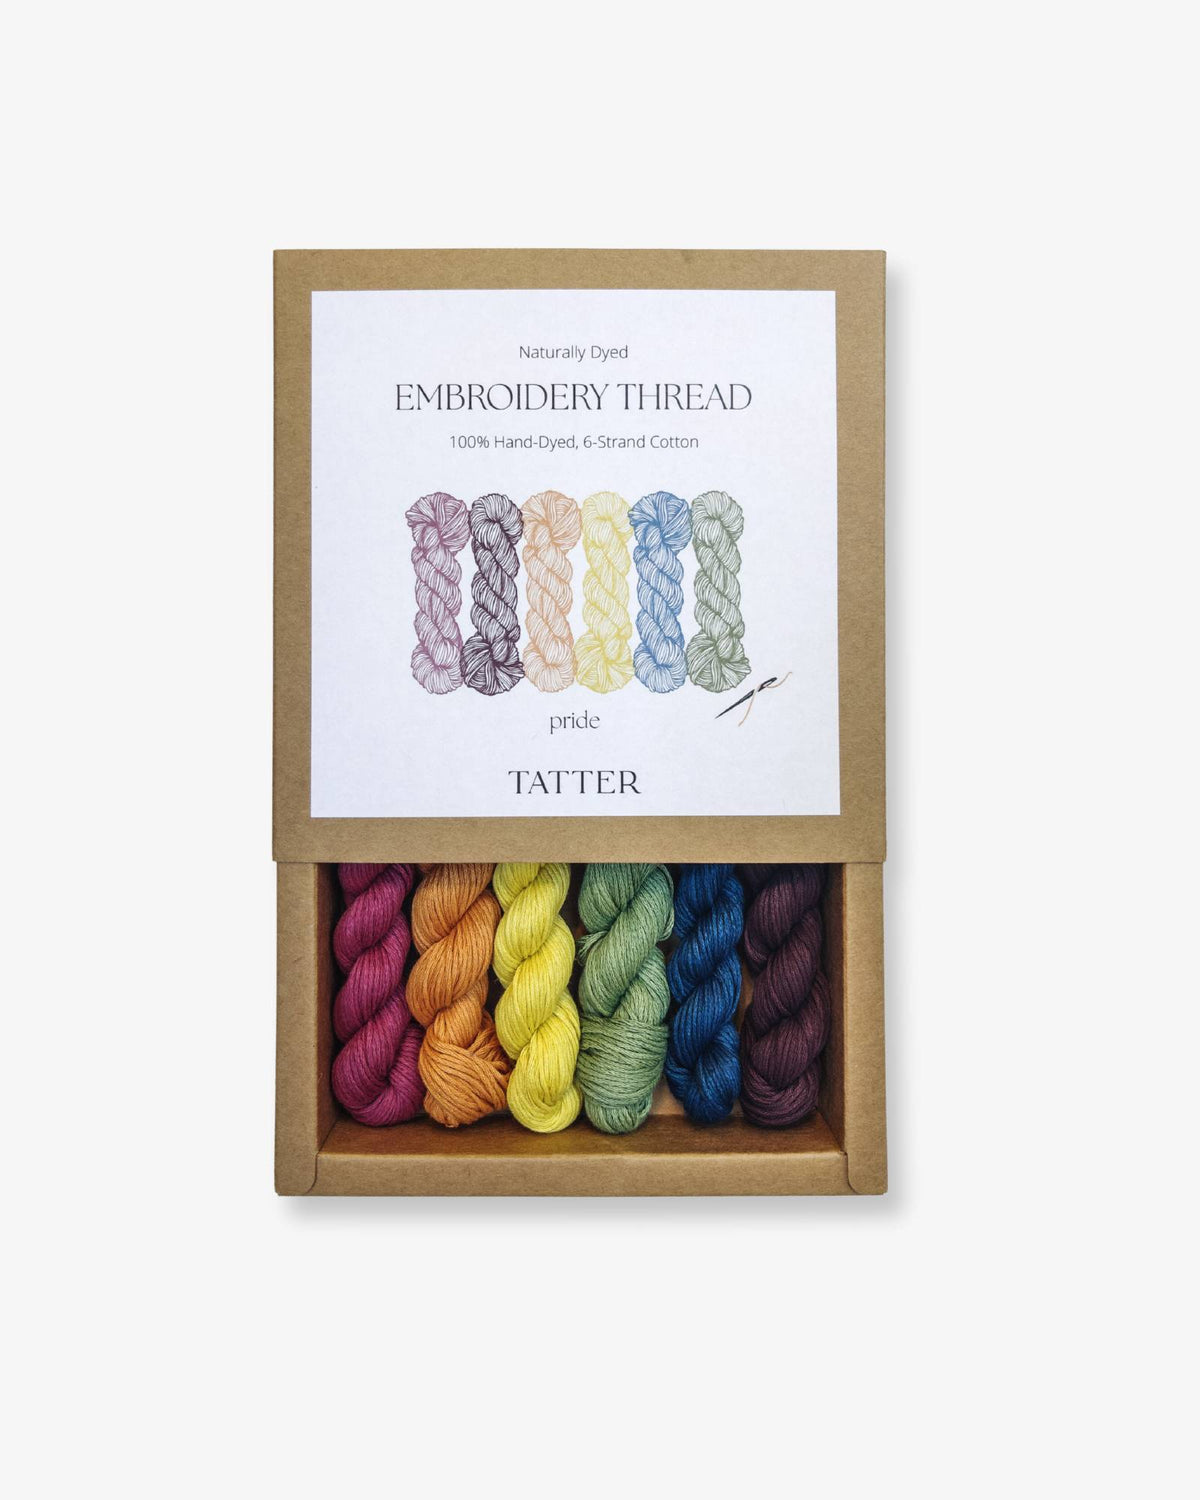 Stranded Embroidery Cotton Threads